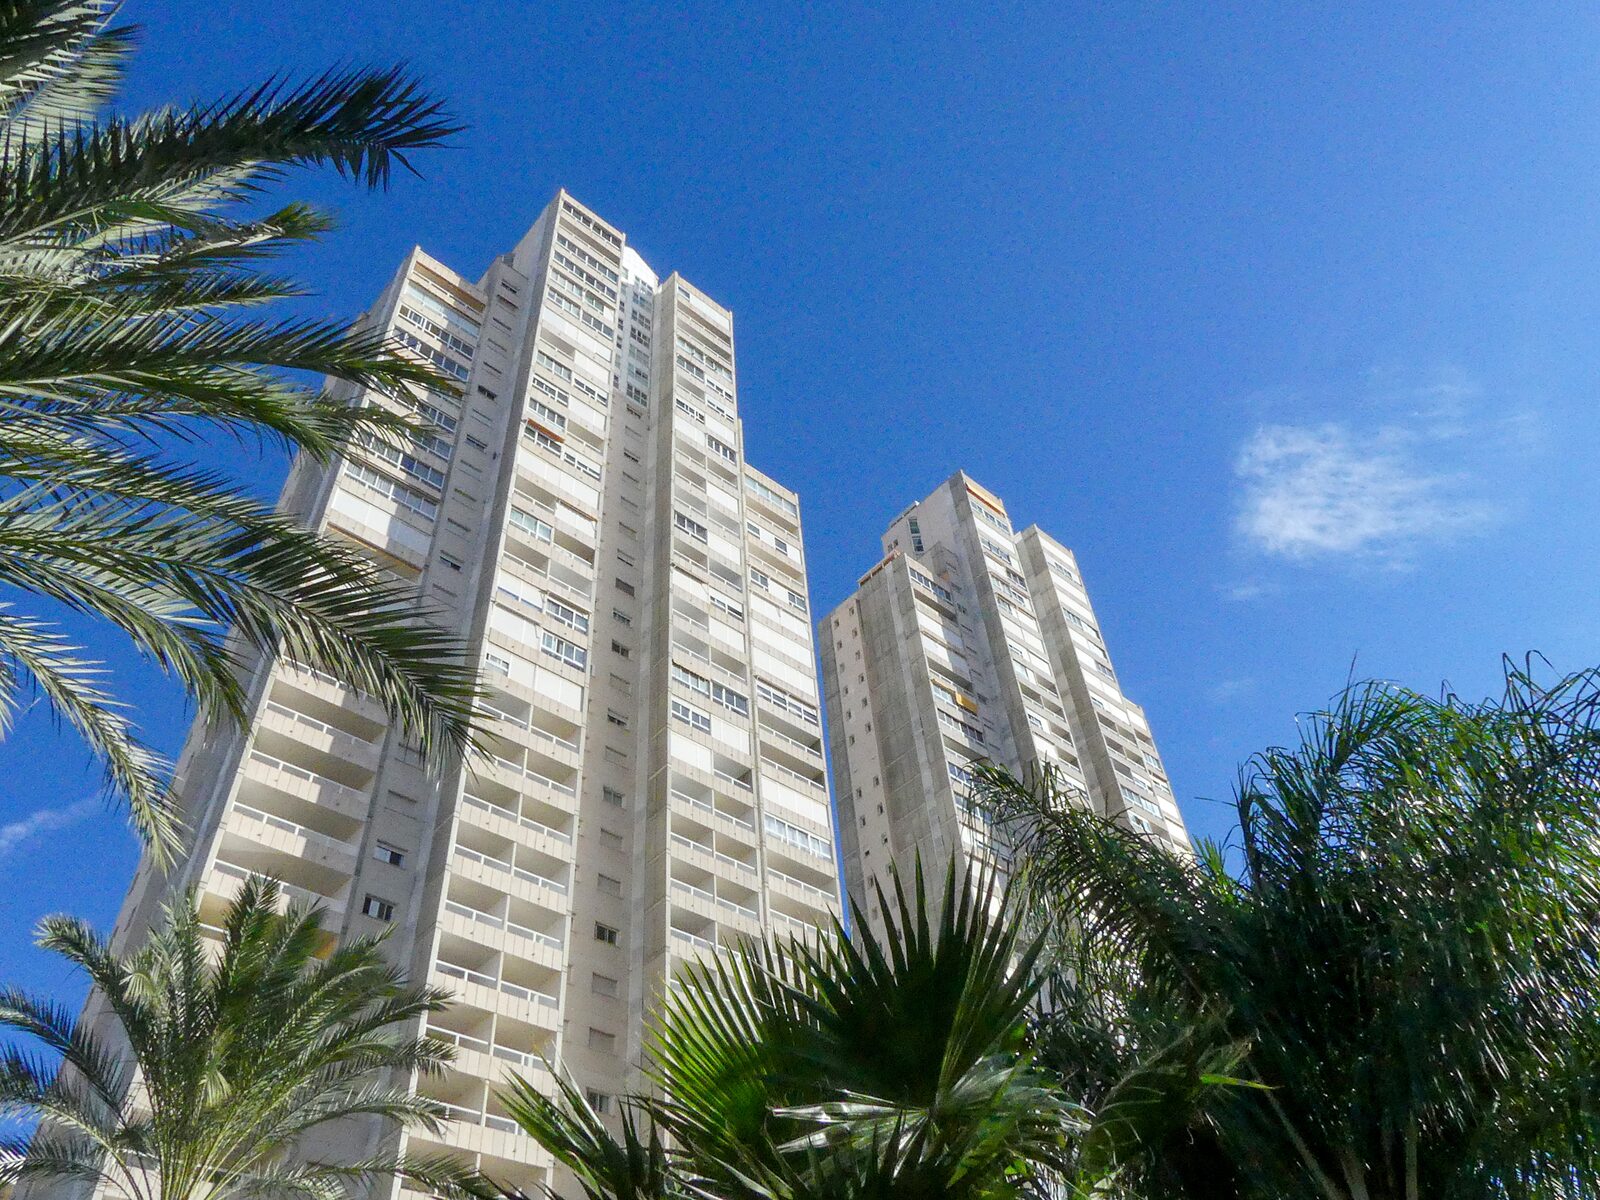 View of the towers of Gemelos 22 against the blue sky